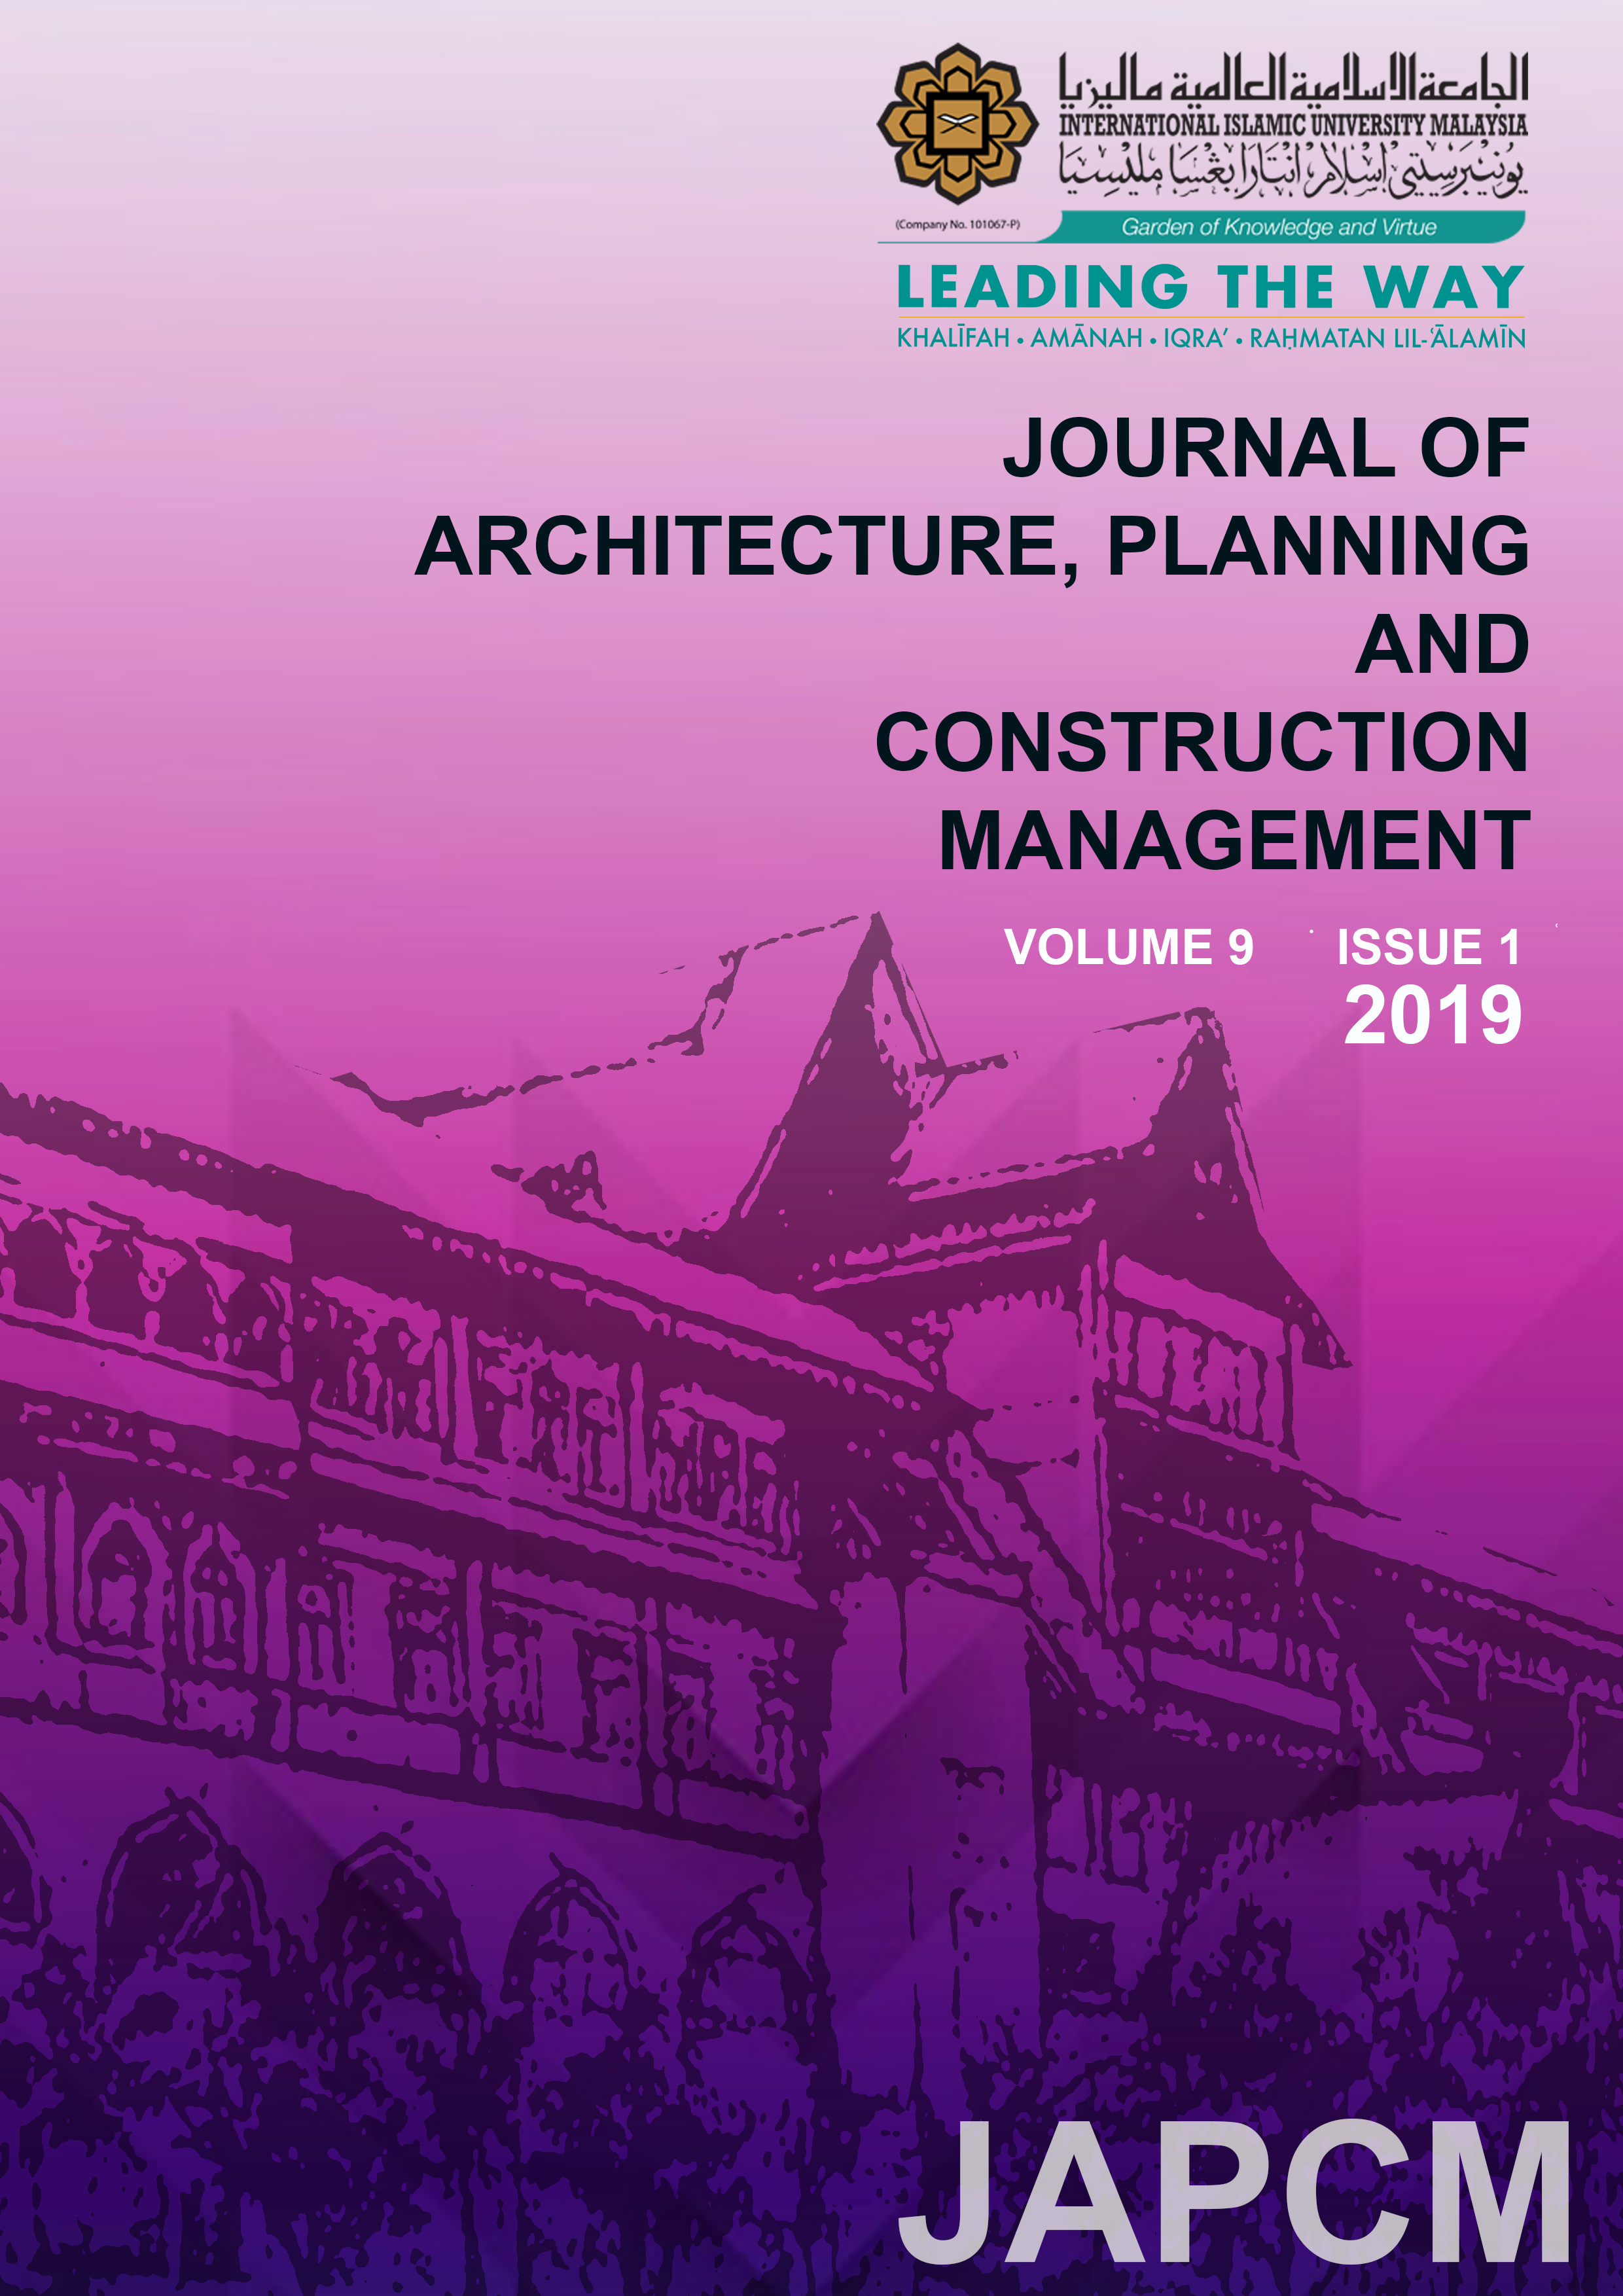 					View Vol. 9 No. 1 (2019): Journal of Architecture, Planning and Construction Management (JAPCM)
				